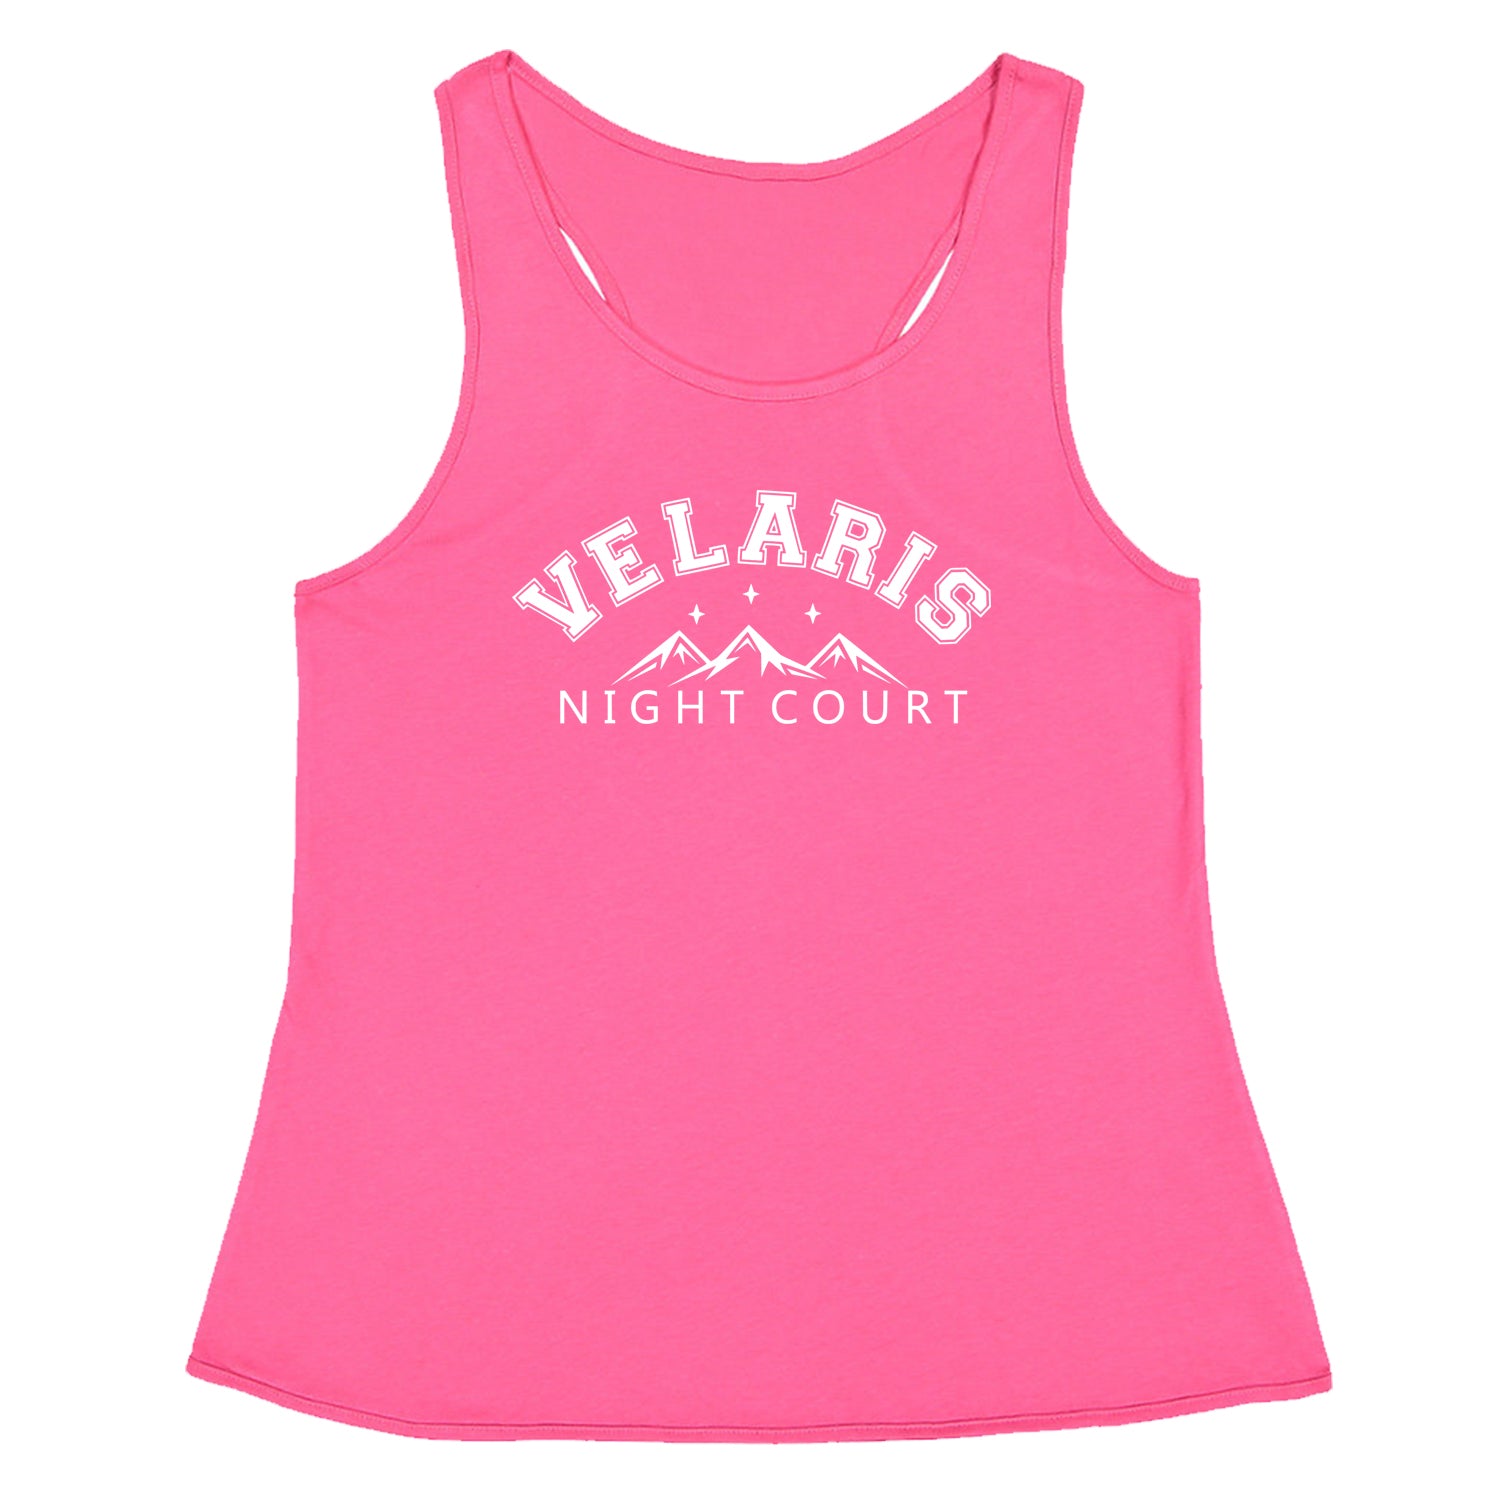 Velaris Night Court Squad Racerback Tank Top for Women acotar, court, illyrian, maas, of, thorns by Expression Tees